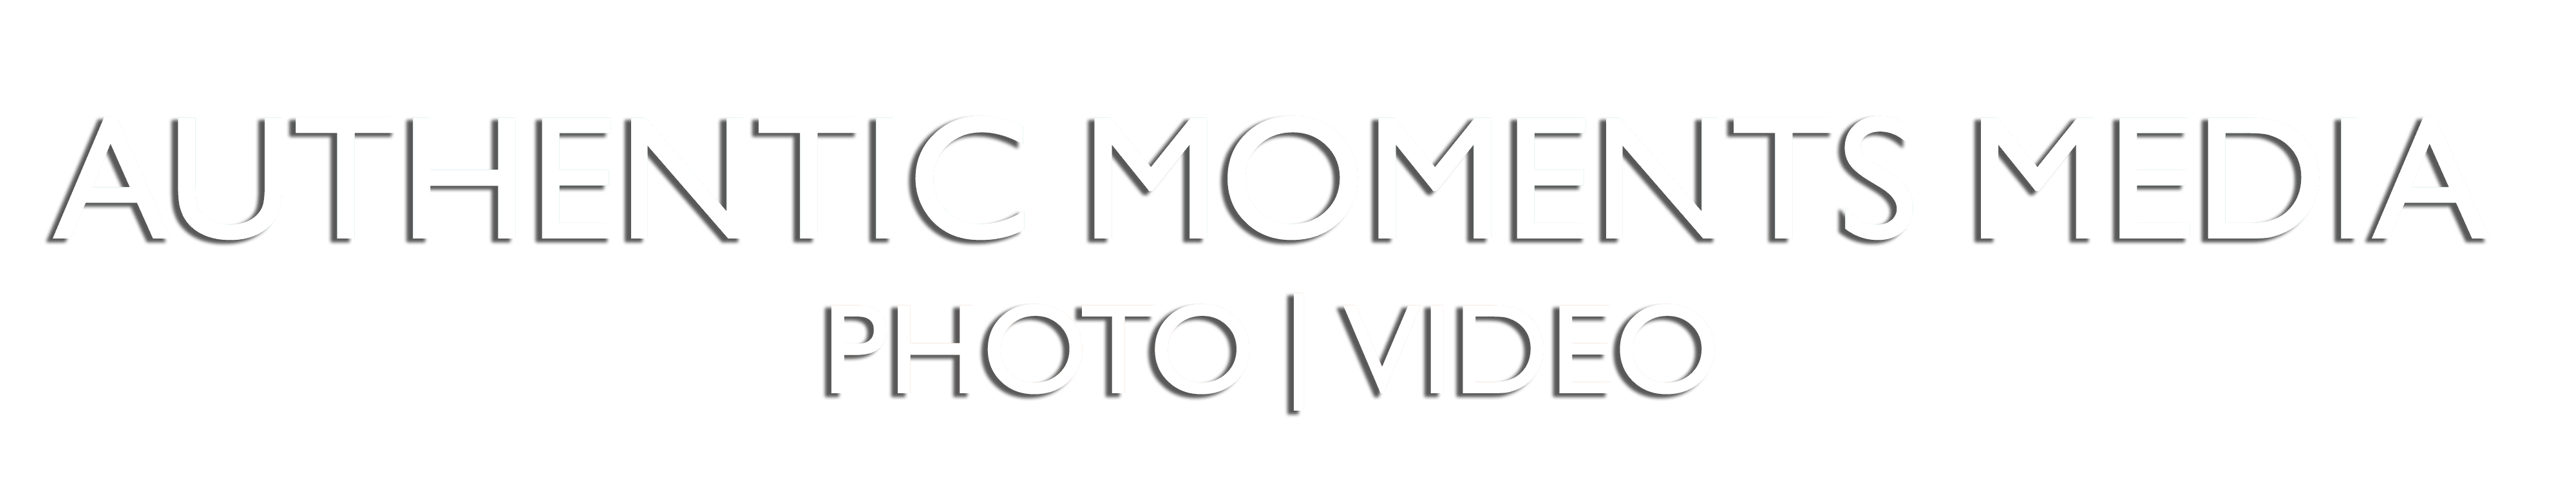 Authentic Moments Media